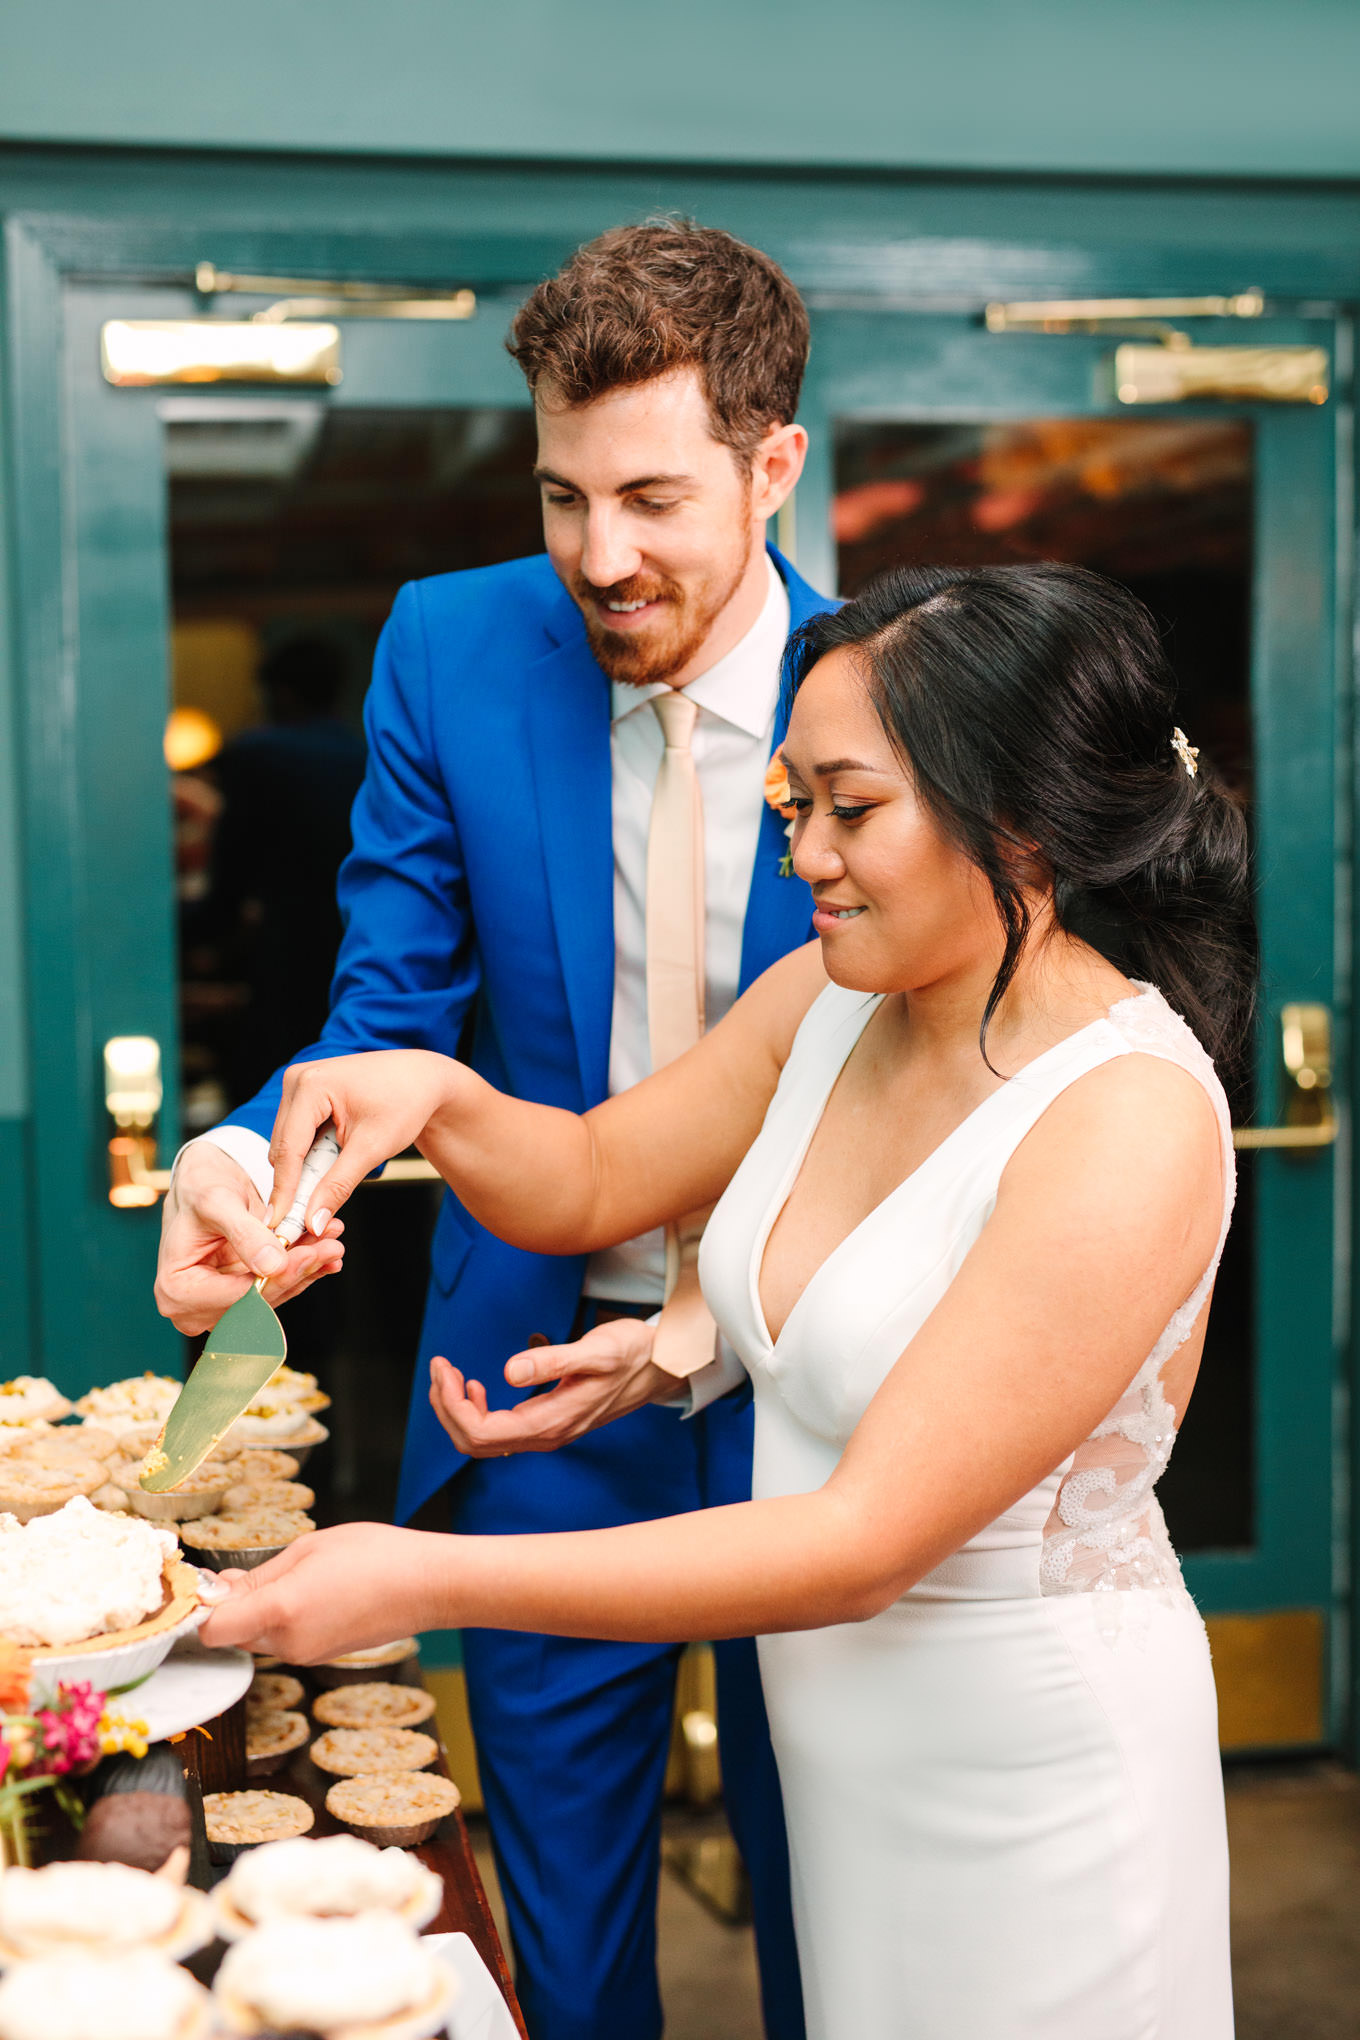 Bride and groom cutting pie together | TV inspired wedding at The Fig House Los Angeles | Published on The Knot | Fresh and colorful photography for fun-loving couples in Southern California | #losangeleswedding #TVwedding #colorfulwedding #theknot   Source: Mary Costa Photography | Los Angeles wedding photographer